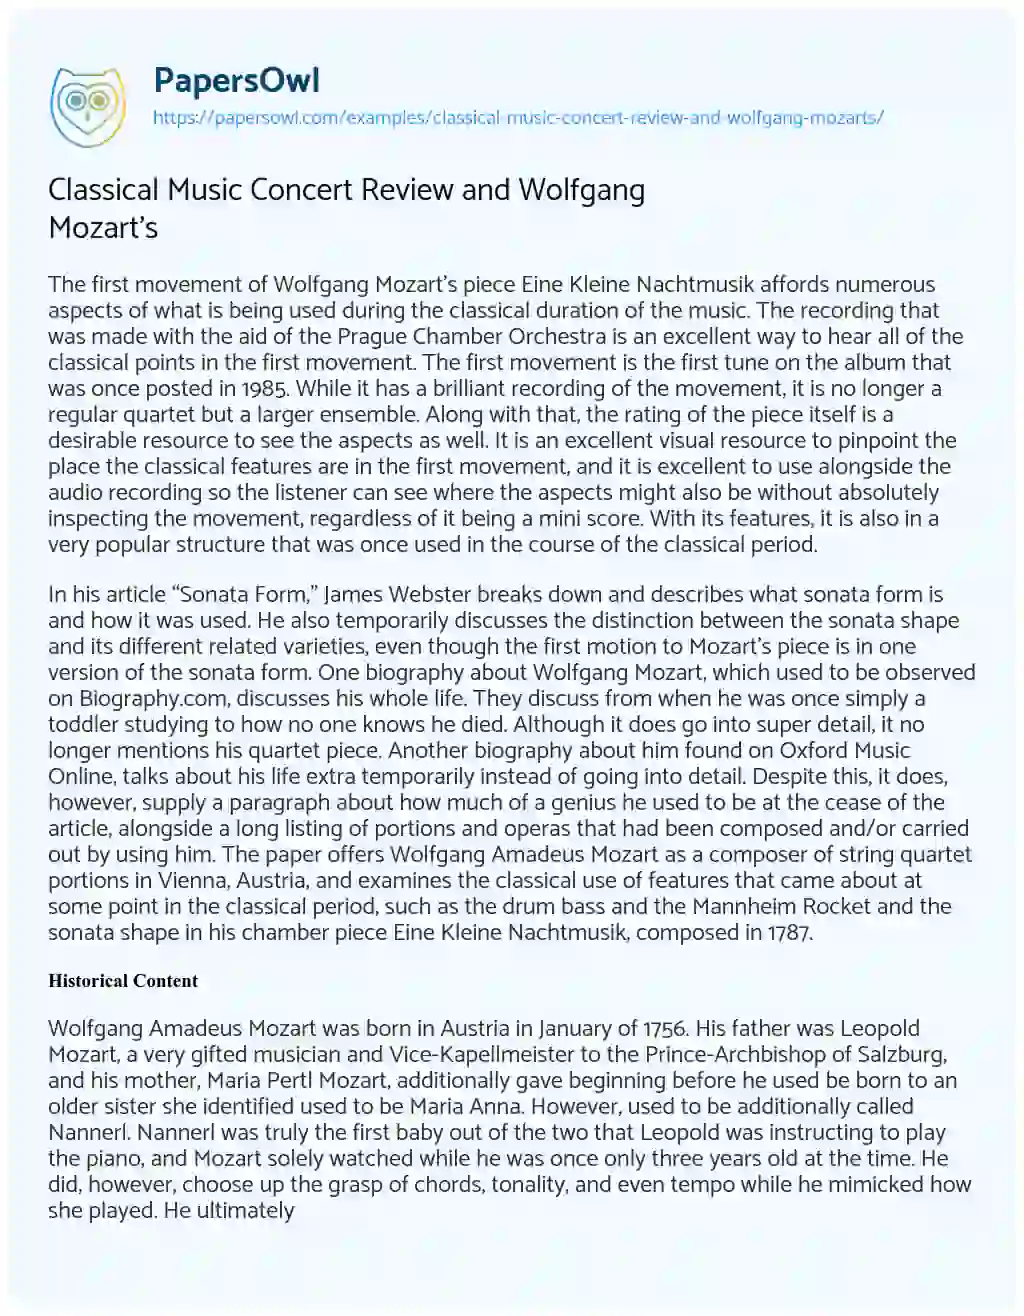 Essay on Classical Music Concert Review and Wolfgang Mozart’s